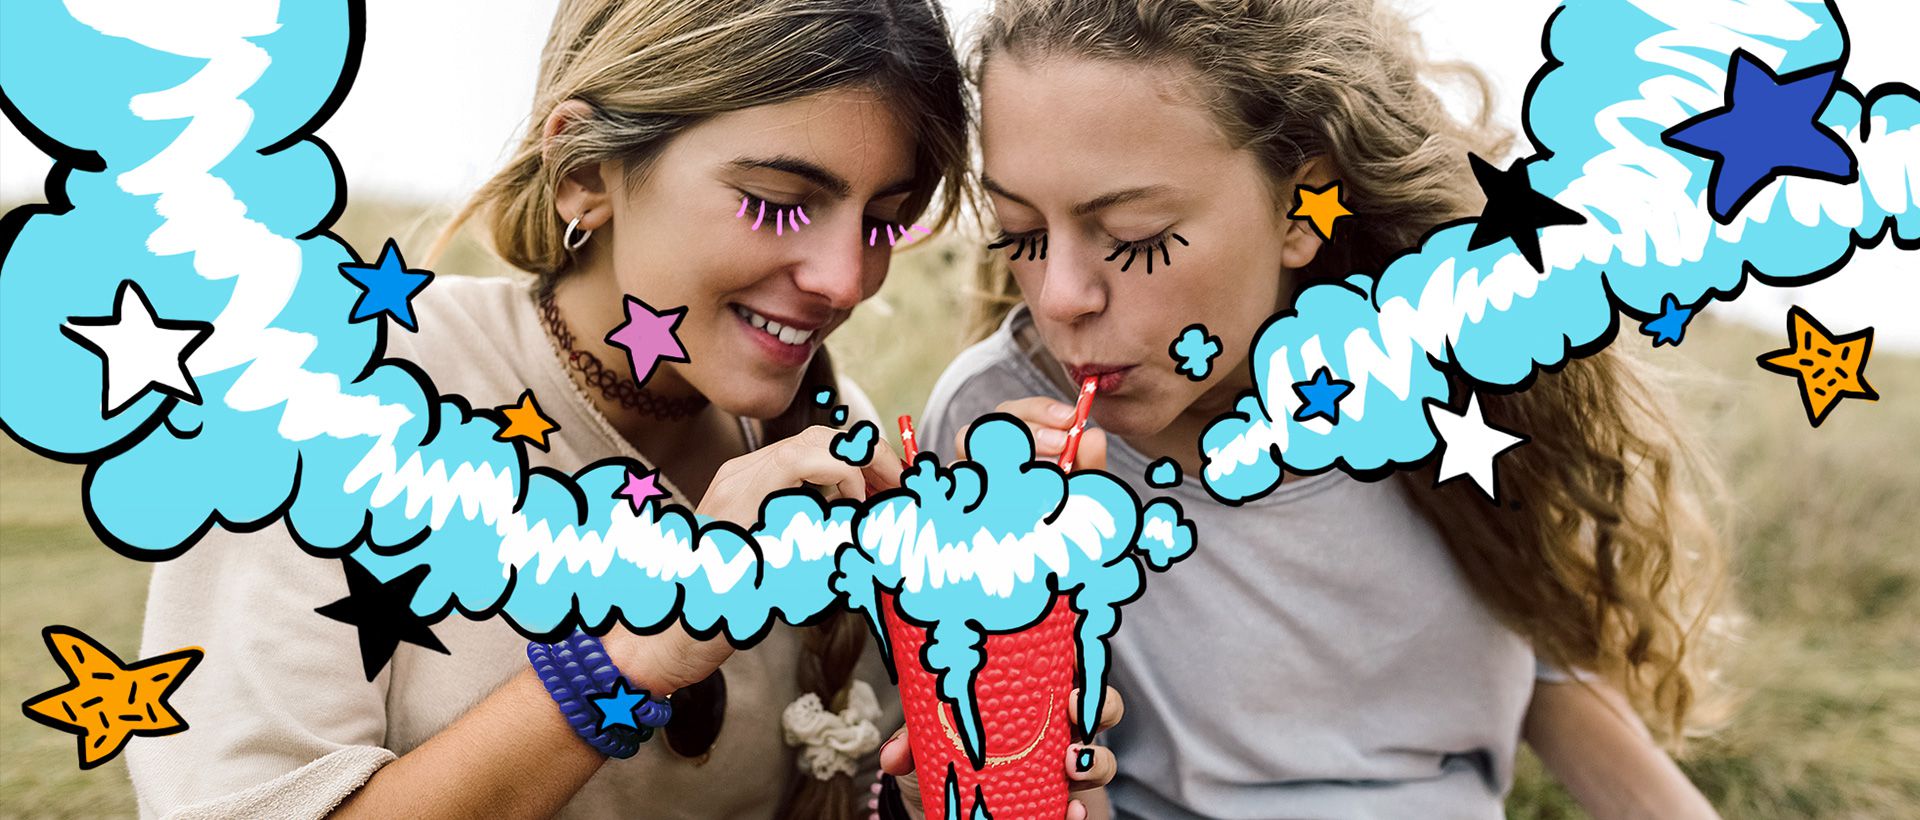 The illustration image of two girls by using samsung note app.